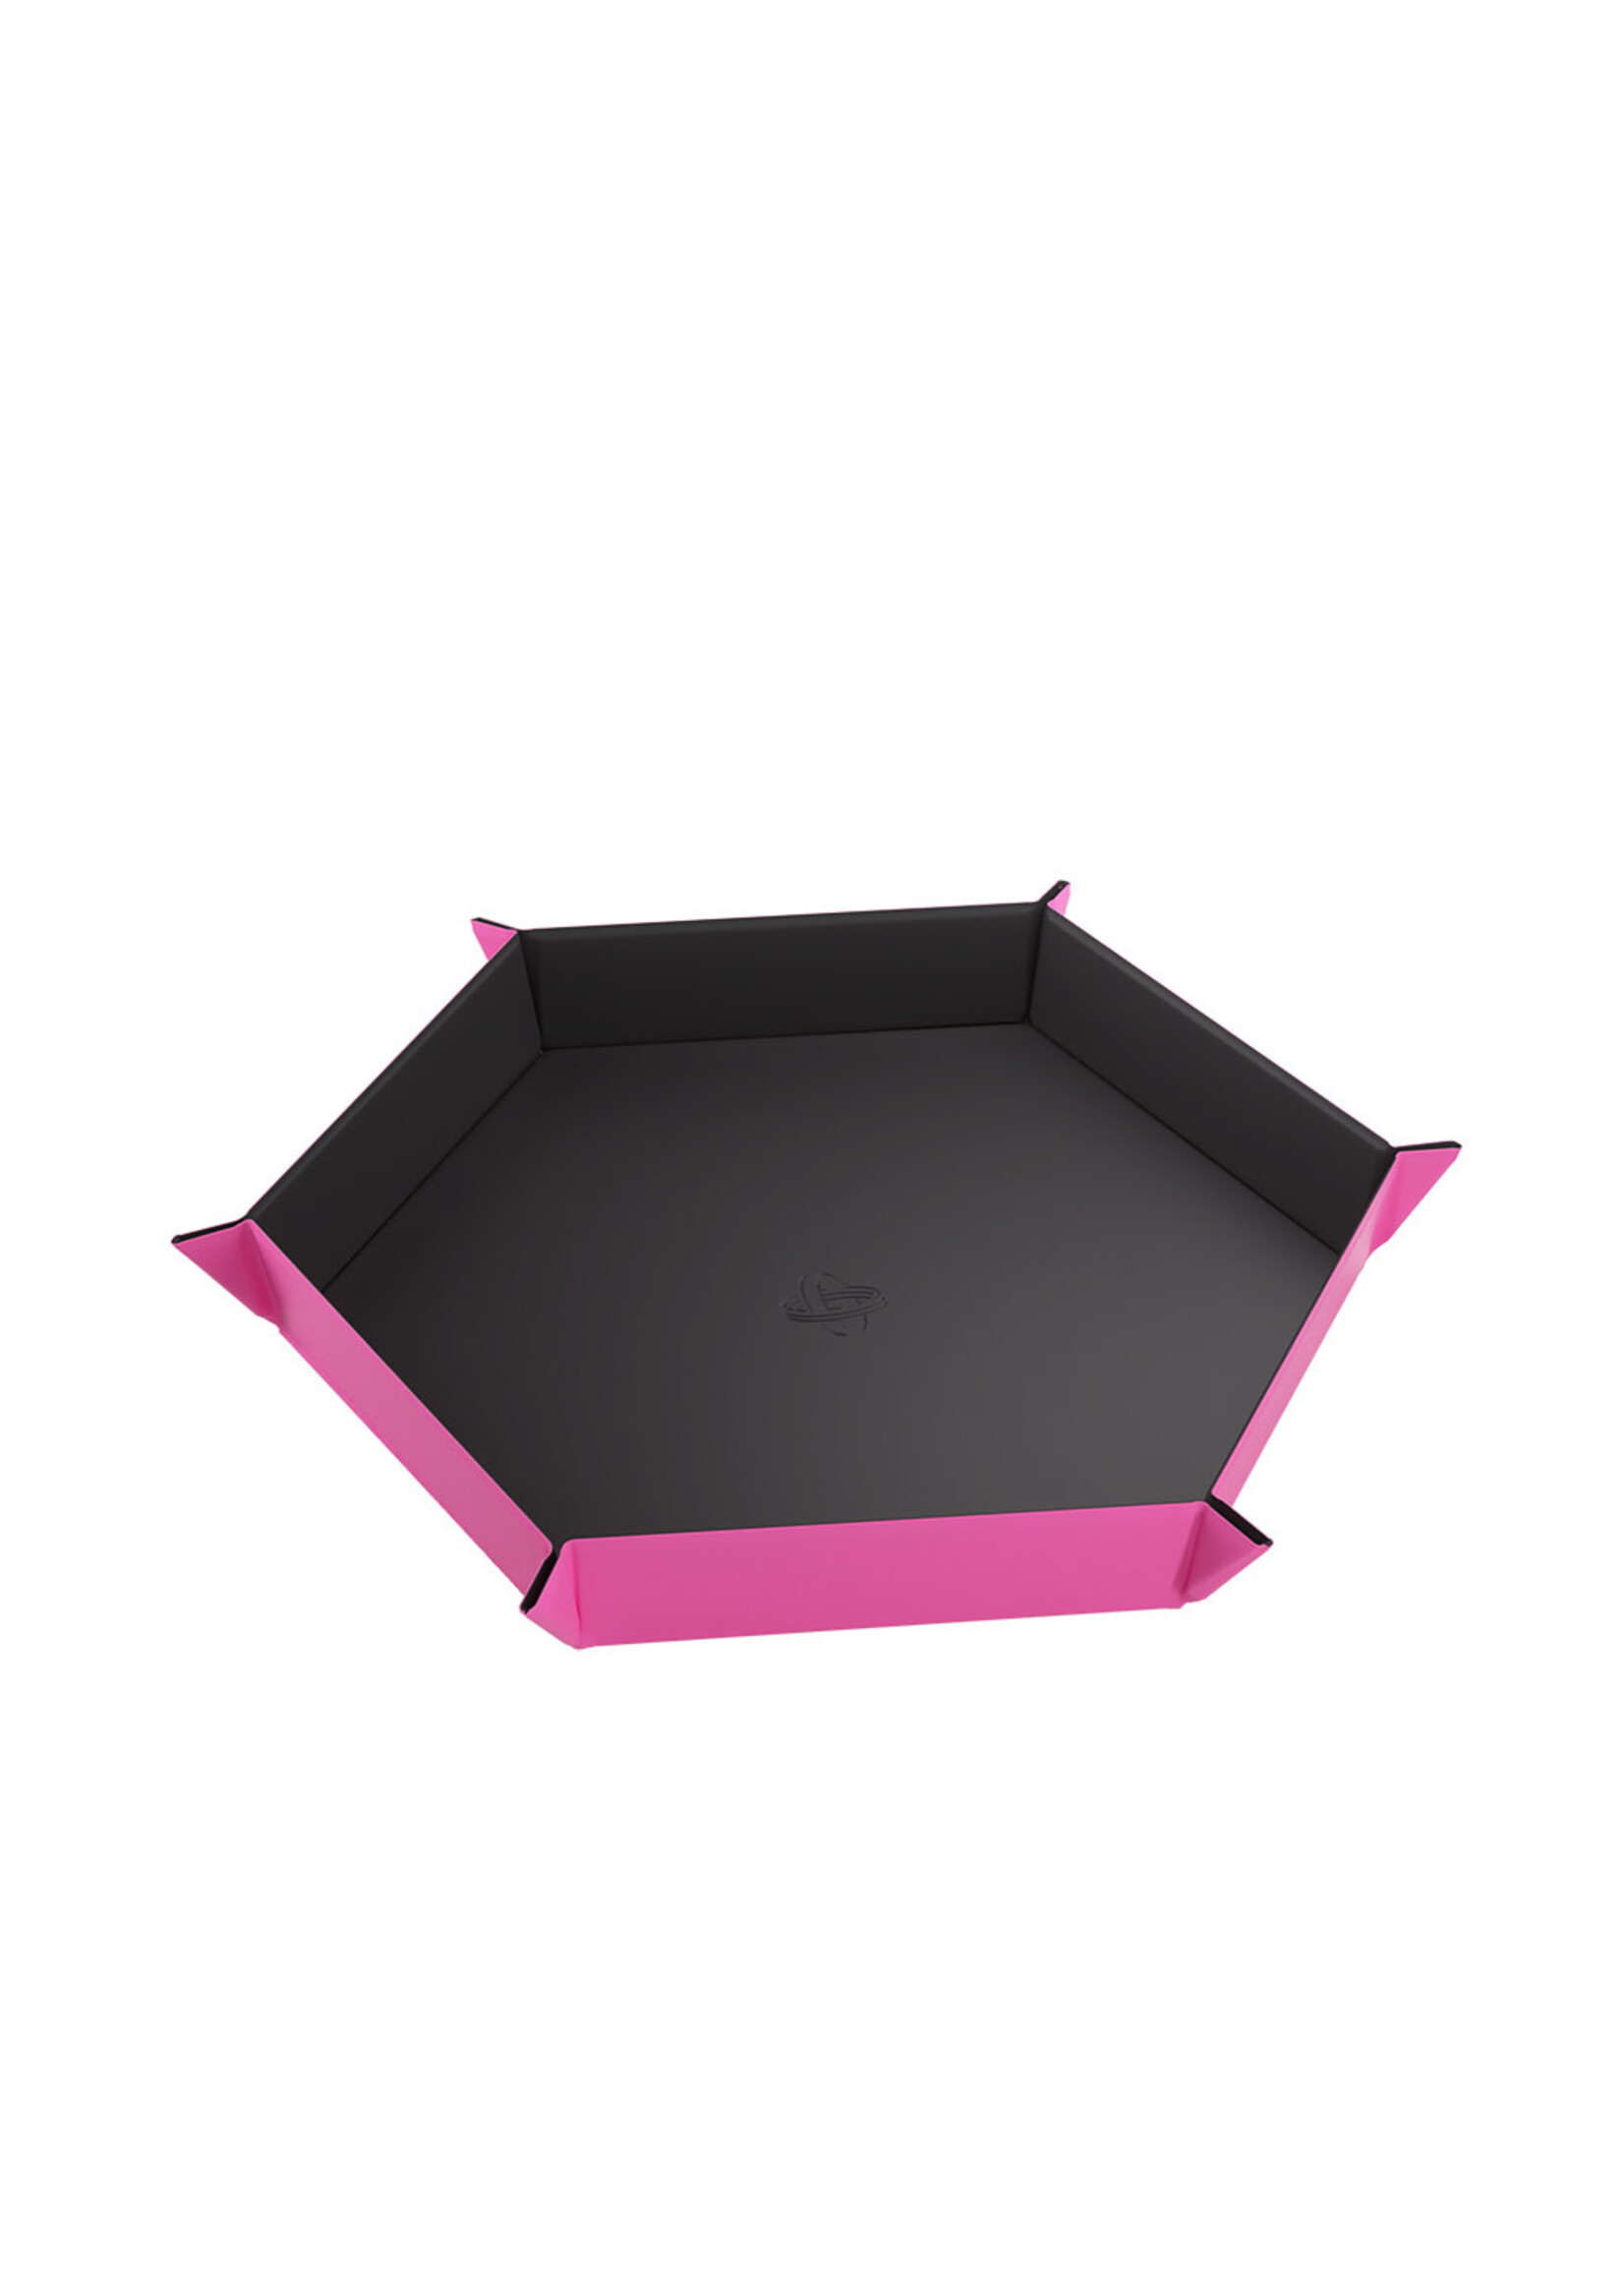 Gamegenic Magnetic Dice Tray Large Hexagonal Black w/ Pink